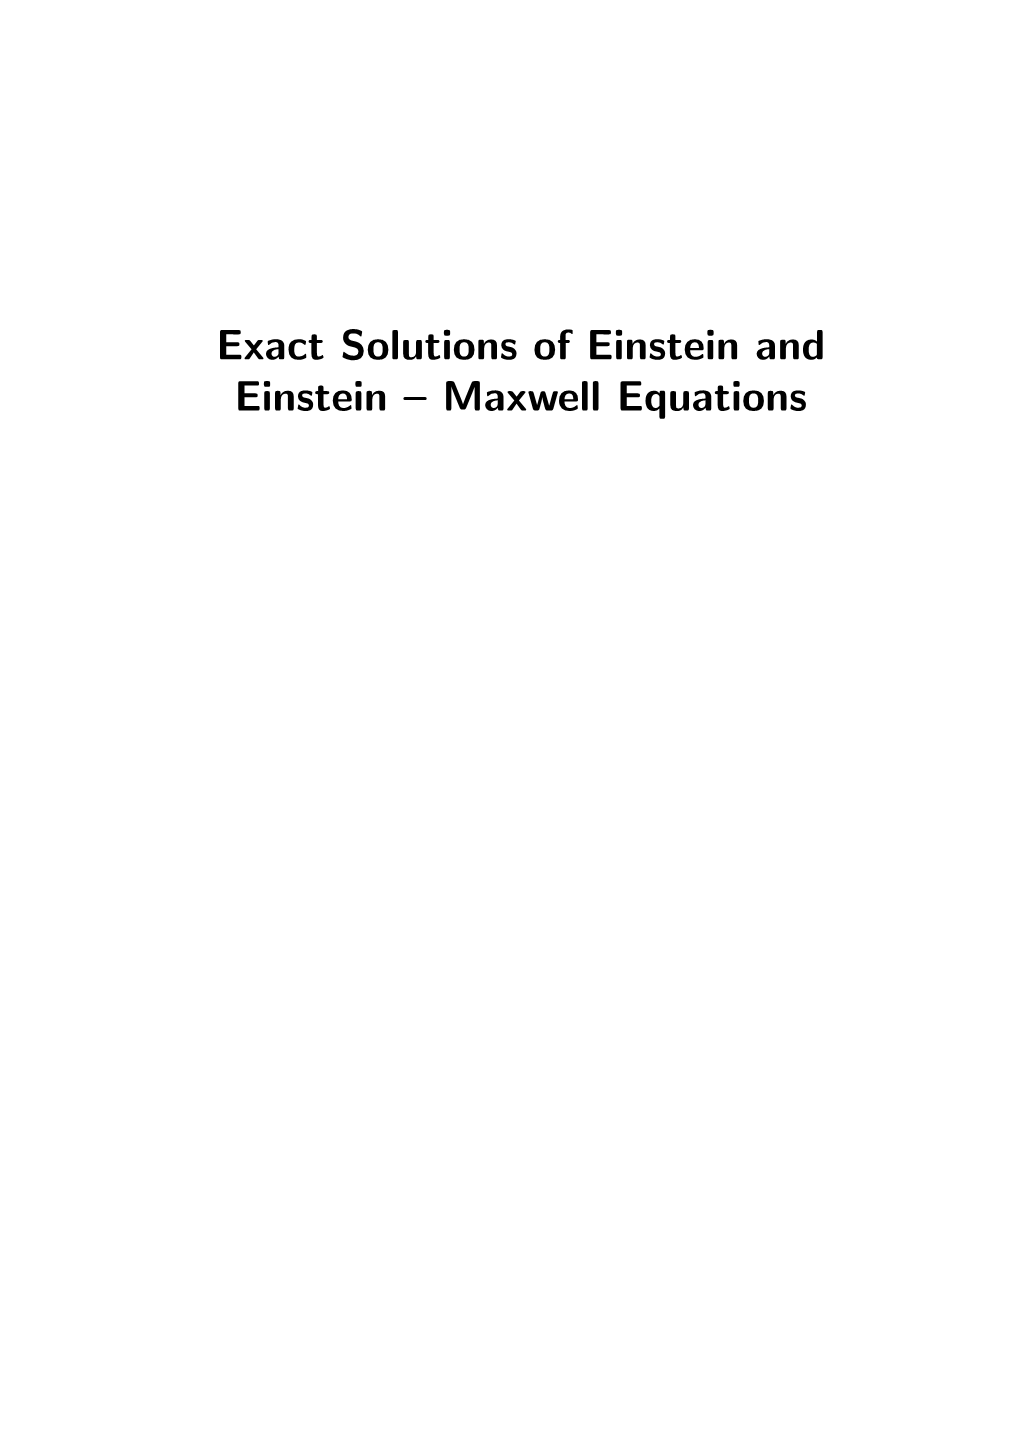 Exact Solutions of Einstein and Einstein – Maxwell Equations